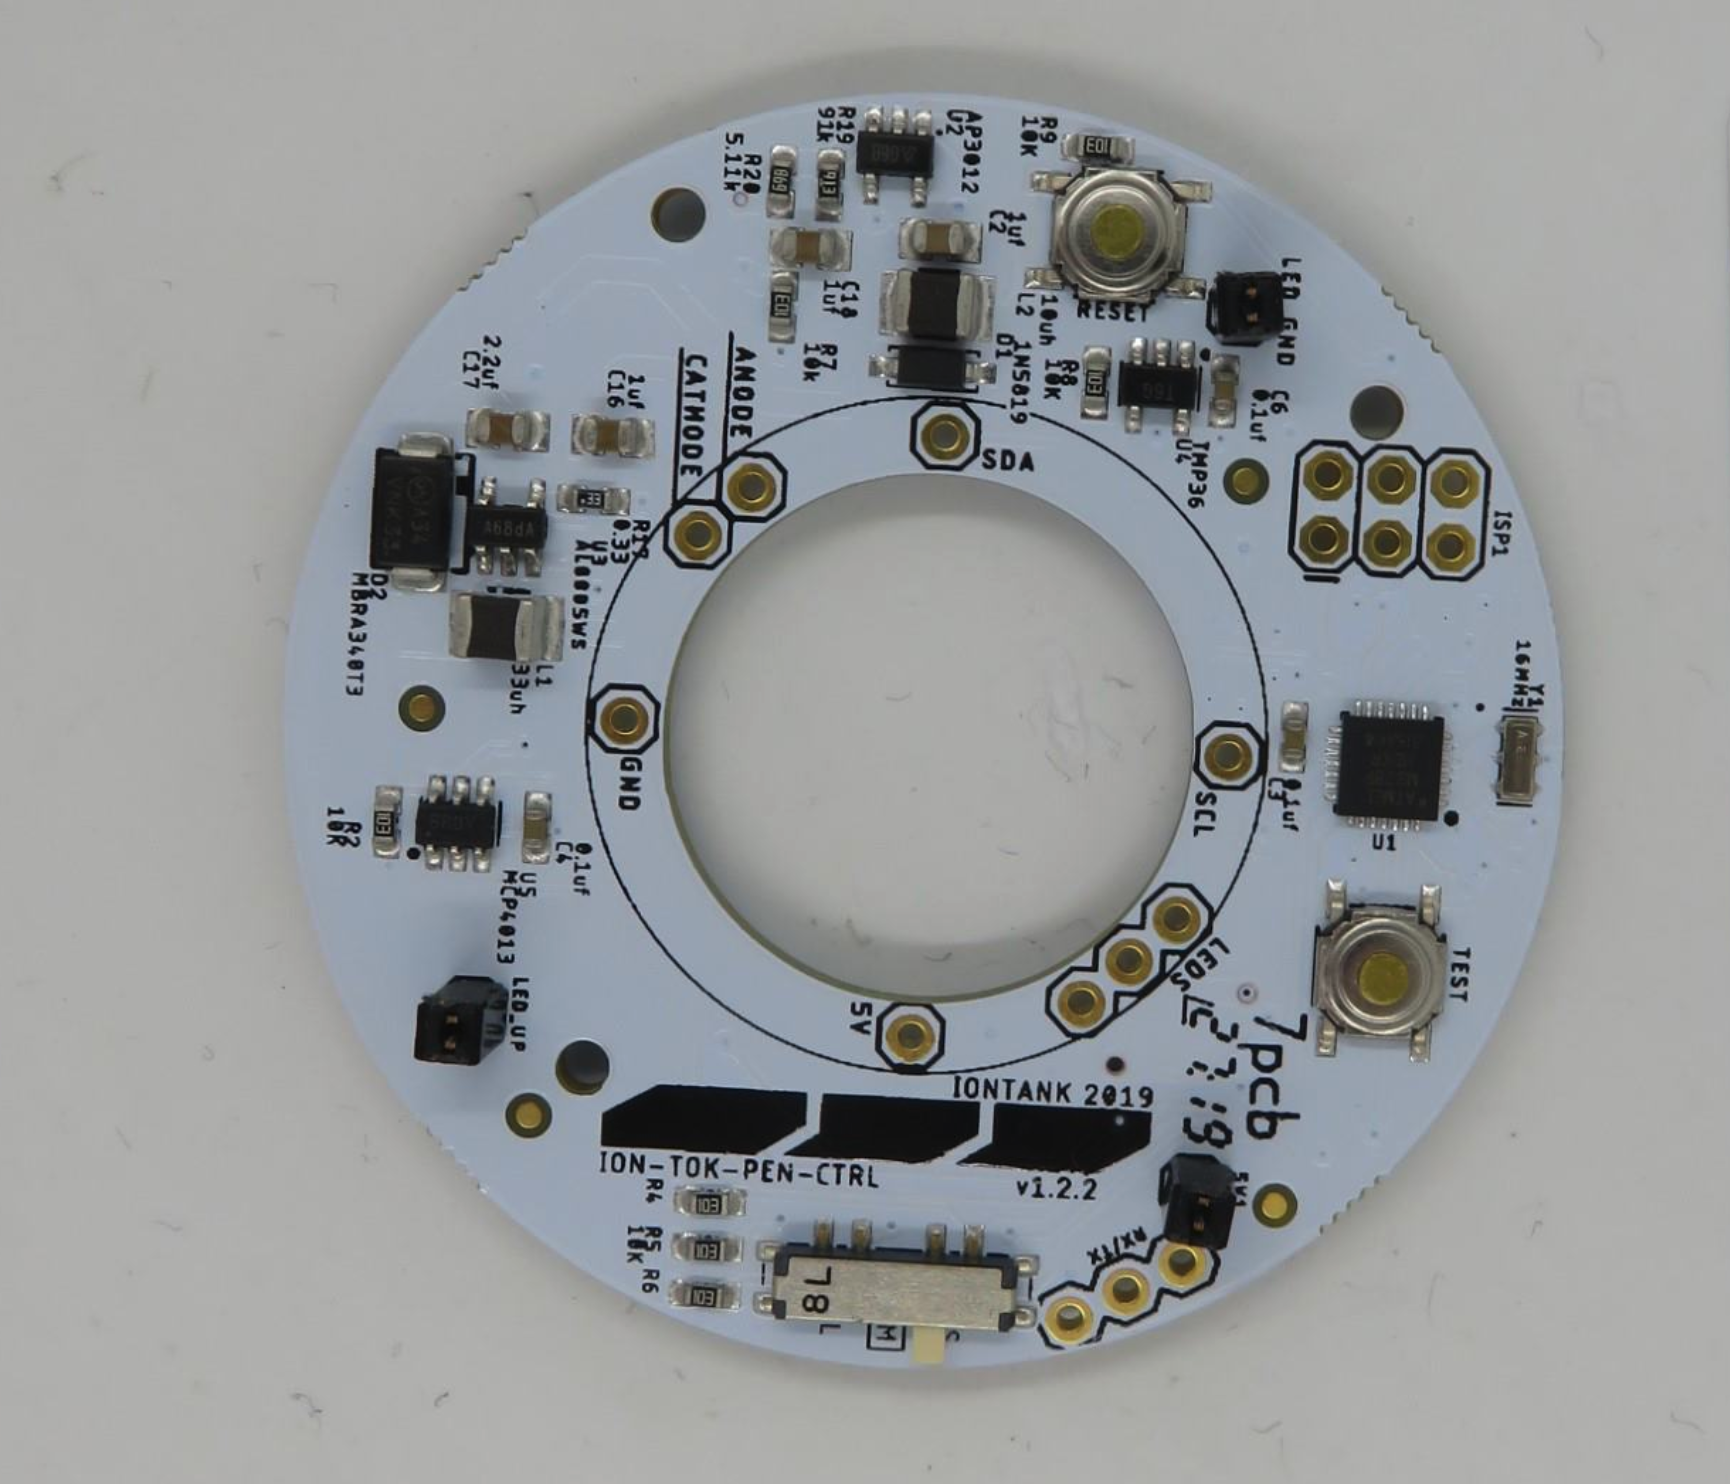 Primary lighting board, which forms the core of the pendant, Courtesy of Iontank.